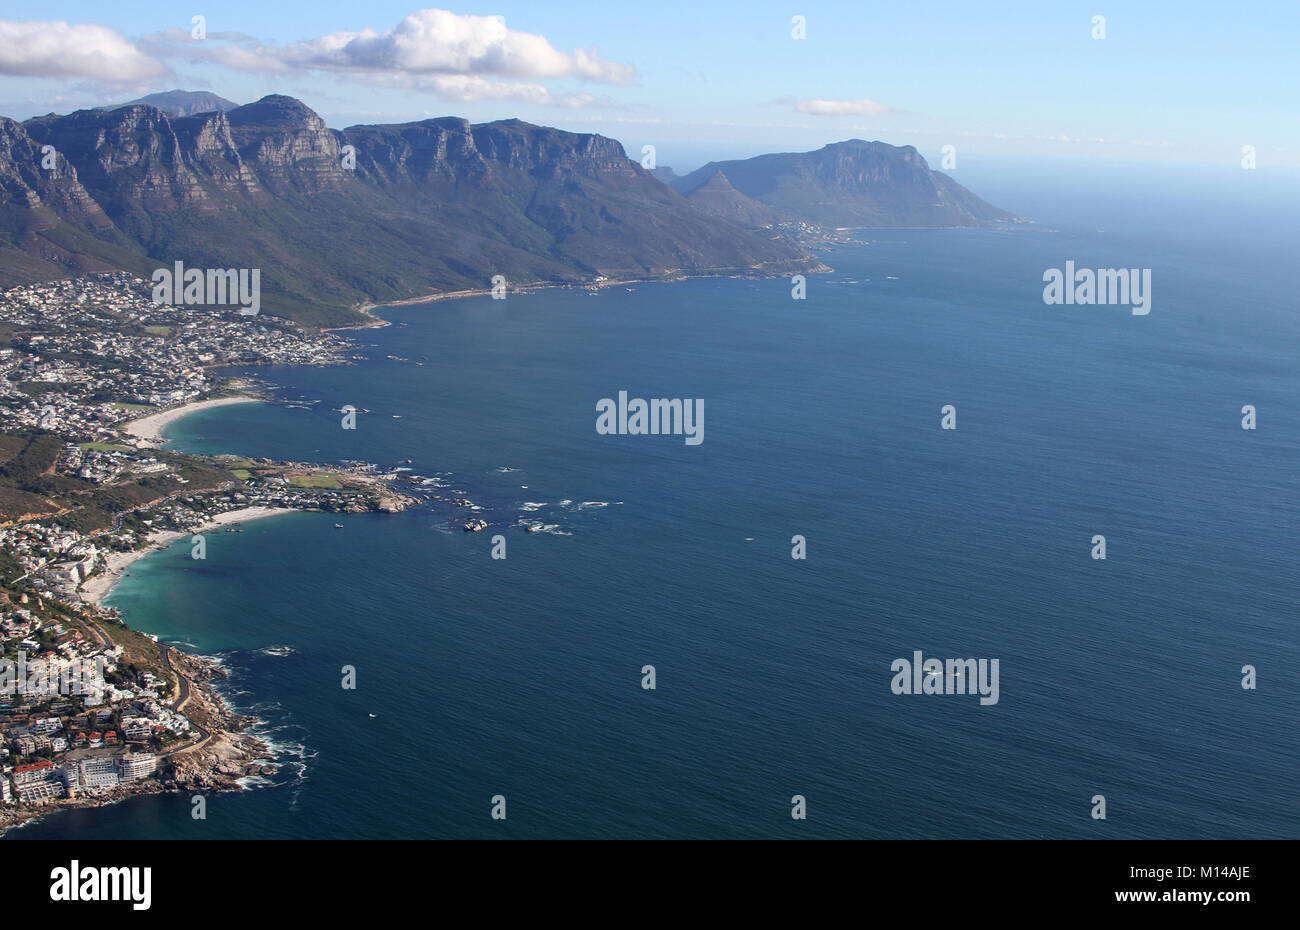 Table Mountain, Clifton Beach, Camps Bay and Oudekraal Nature Reserve seen from a Helicopter, Cape Town, Western Cape, South Africa. Stock Photo